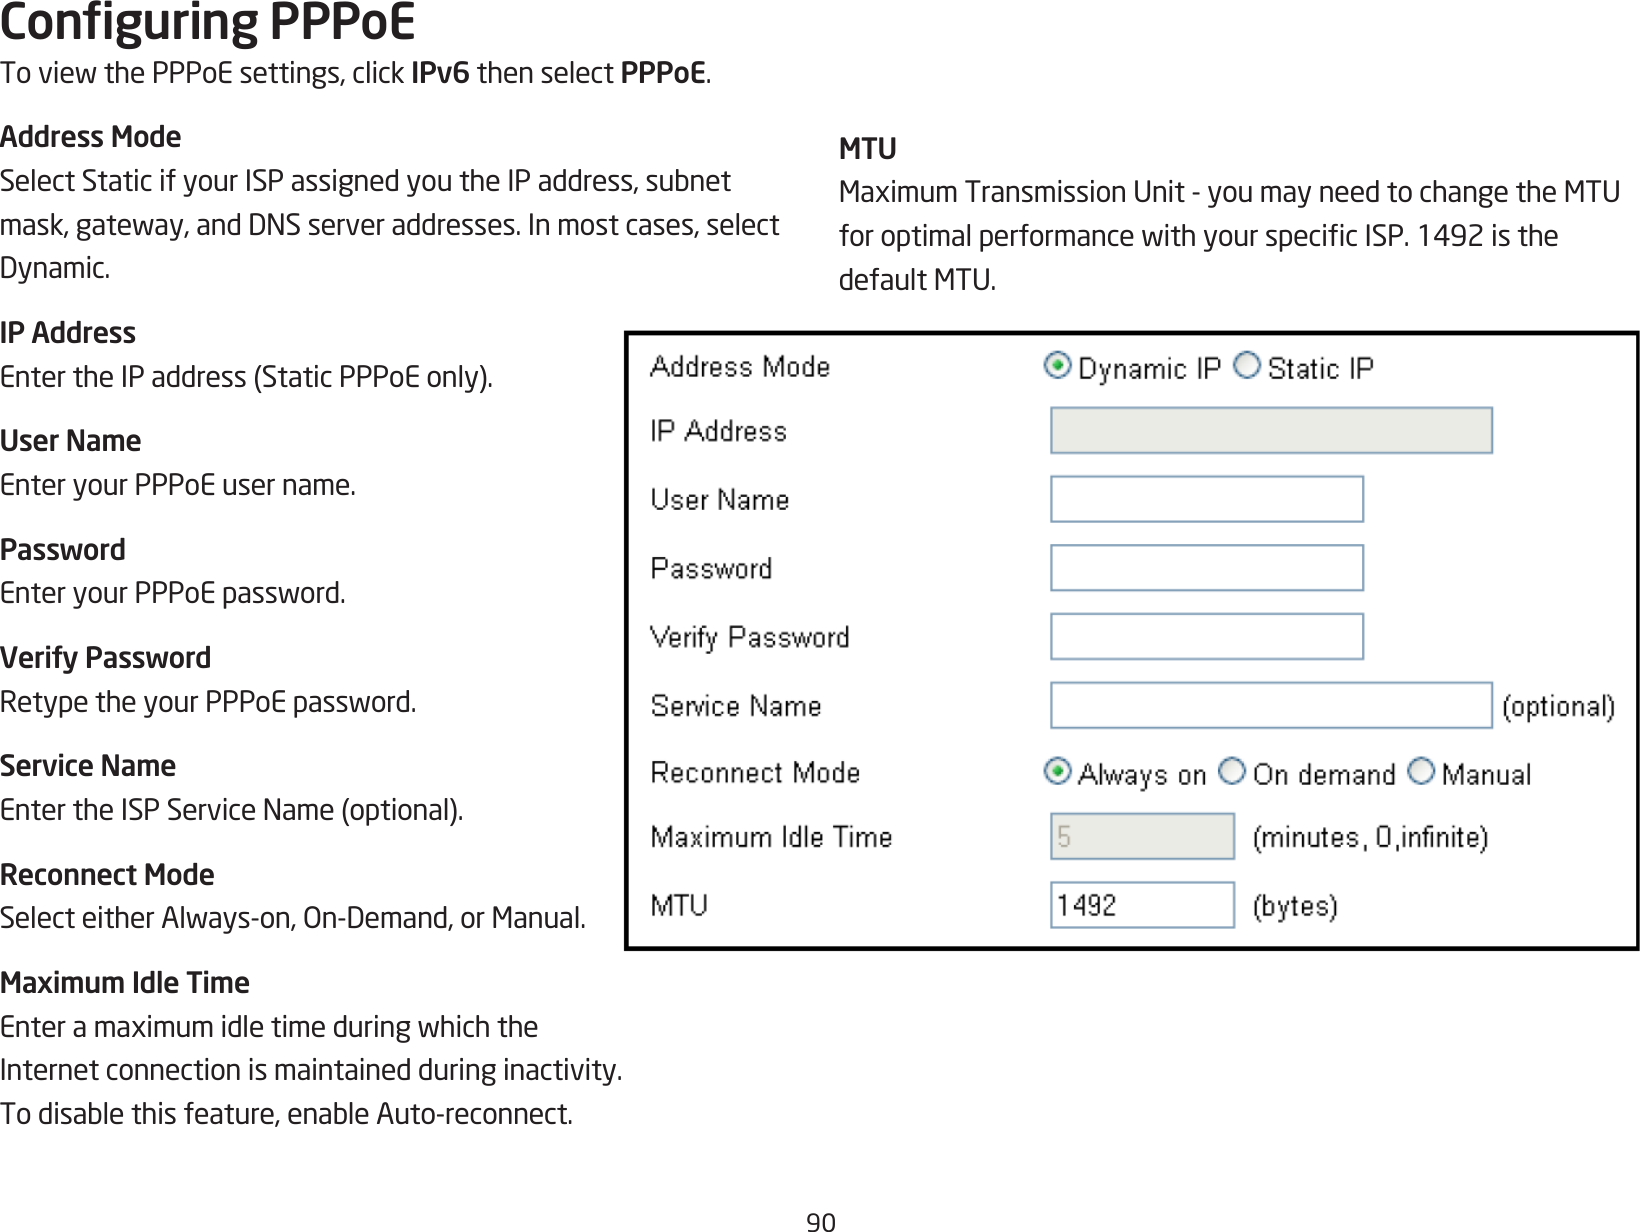 90Conguring PPPoEToviewthePPPoEsettings,clickIPv6 then select PPPoE.Address ModeSelectStaticifyourISPassignedyoutheIPaddress,subnetmask,gateway,andDNSserveraddresses.Inmostcases,selectDynamic.IP AddressEntertheIPaddress(StaticPPPoEonly).User NameEnter your PPPoE user name.PasswordEnteryourPPPoEpassword.Verify PasswordRetypetheyourPPPoEpassword.Service NameEntertheISPServiceName(optional).Reconnect ModeSelecteitherAlways-on,On-Demand,orManual.Maximum Idle TimeEnteramaximumidletimeduringwhichtheInternet connection is maintained during inactivity. Todisablethisfeature,enableAuto-reconnect.MTUMaximumTransmissionUnit-youmayneedtochangetheMTUforoptimalperformancewithyourspecicISP.1492isthedefaultMTU.